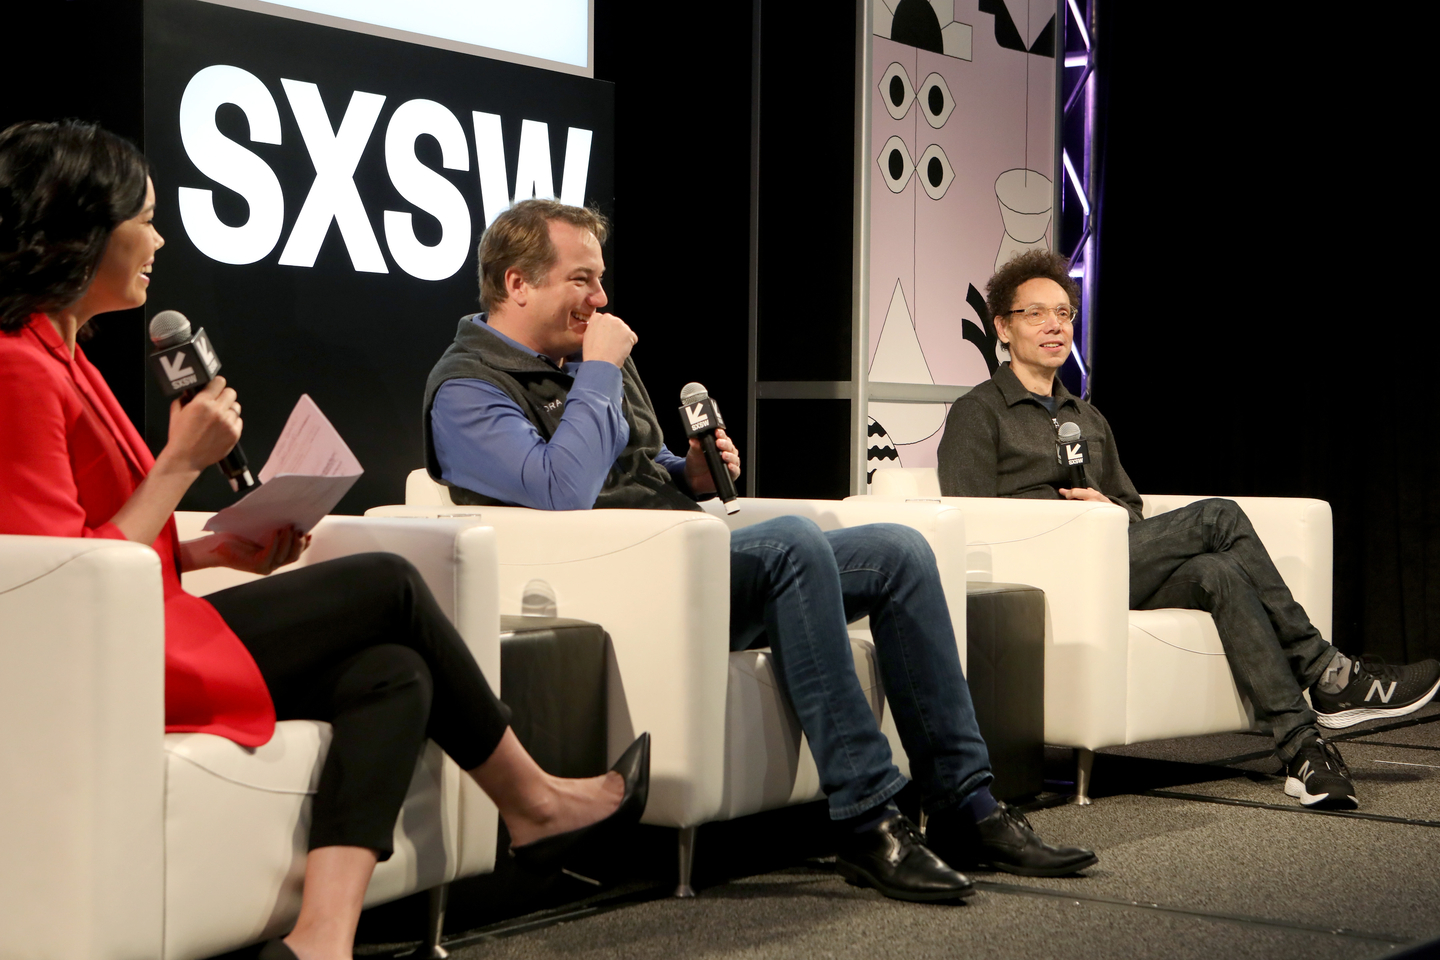 (L-R) Jo Ling Kent, Chris Urmson, and Malcolm Gladwell at Featured Session: Self-Driving Cars: The Future is When? Photo by Samantha Burkardt/Getty Images for SXSW